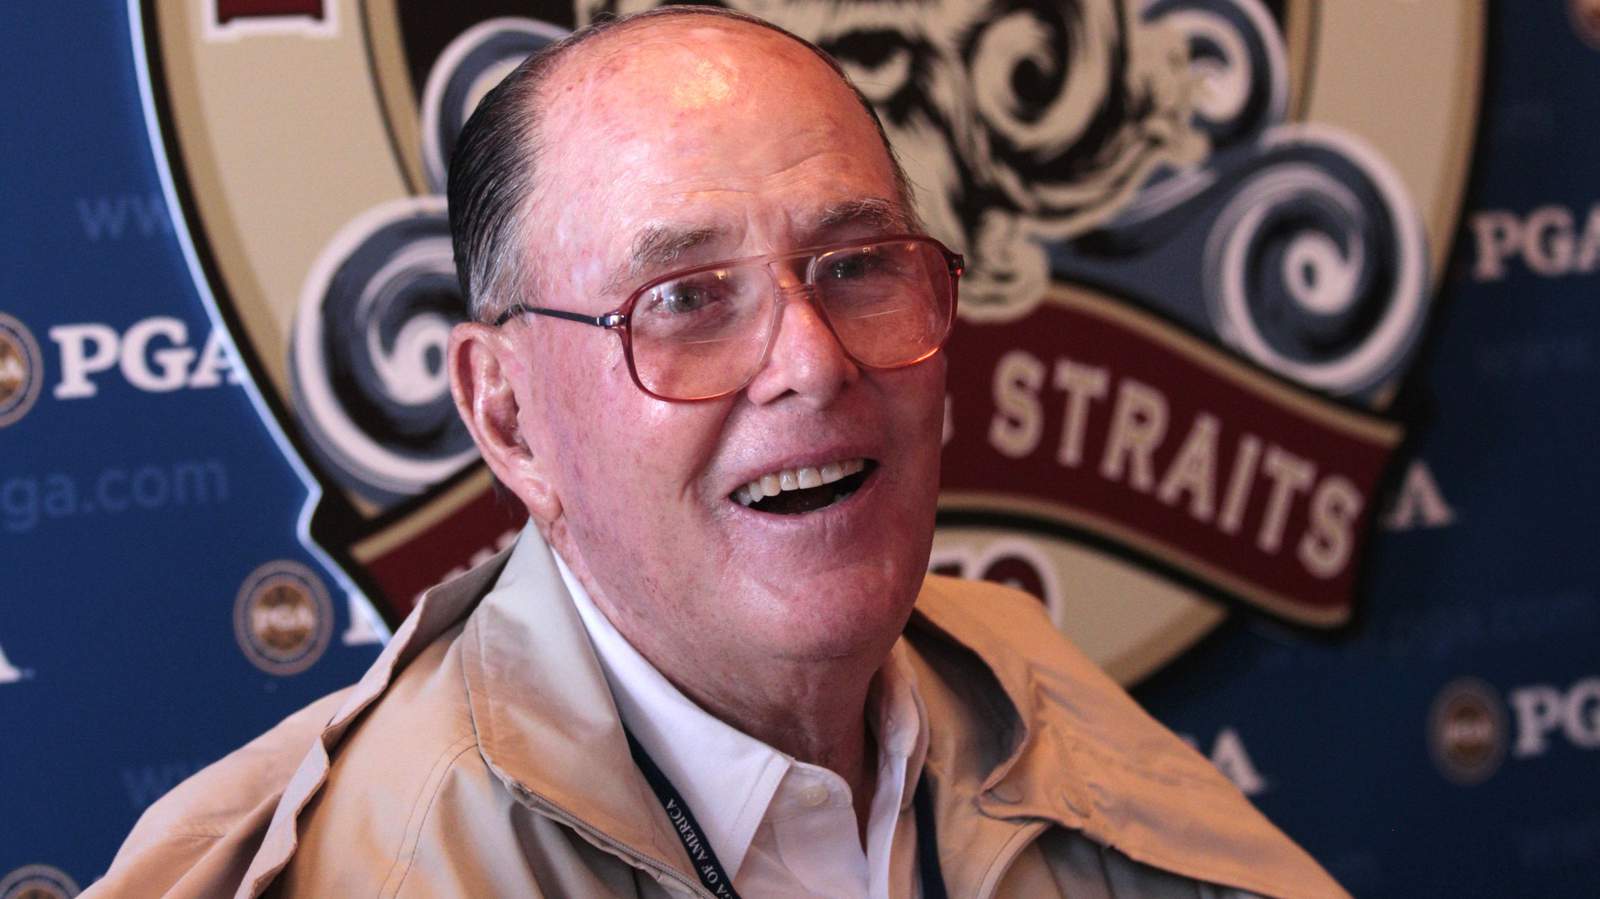 Pete Dye, architect of TPC Sawgrass, dozens of other courses, dies at 94